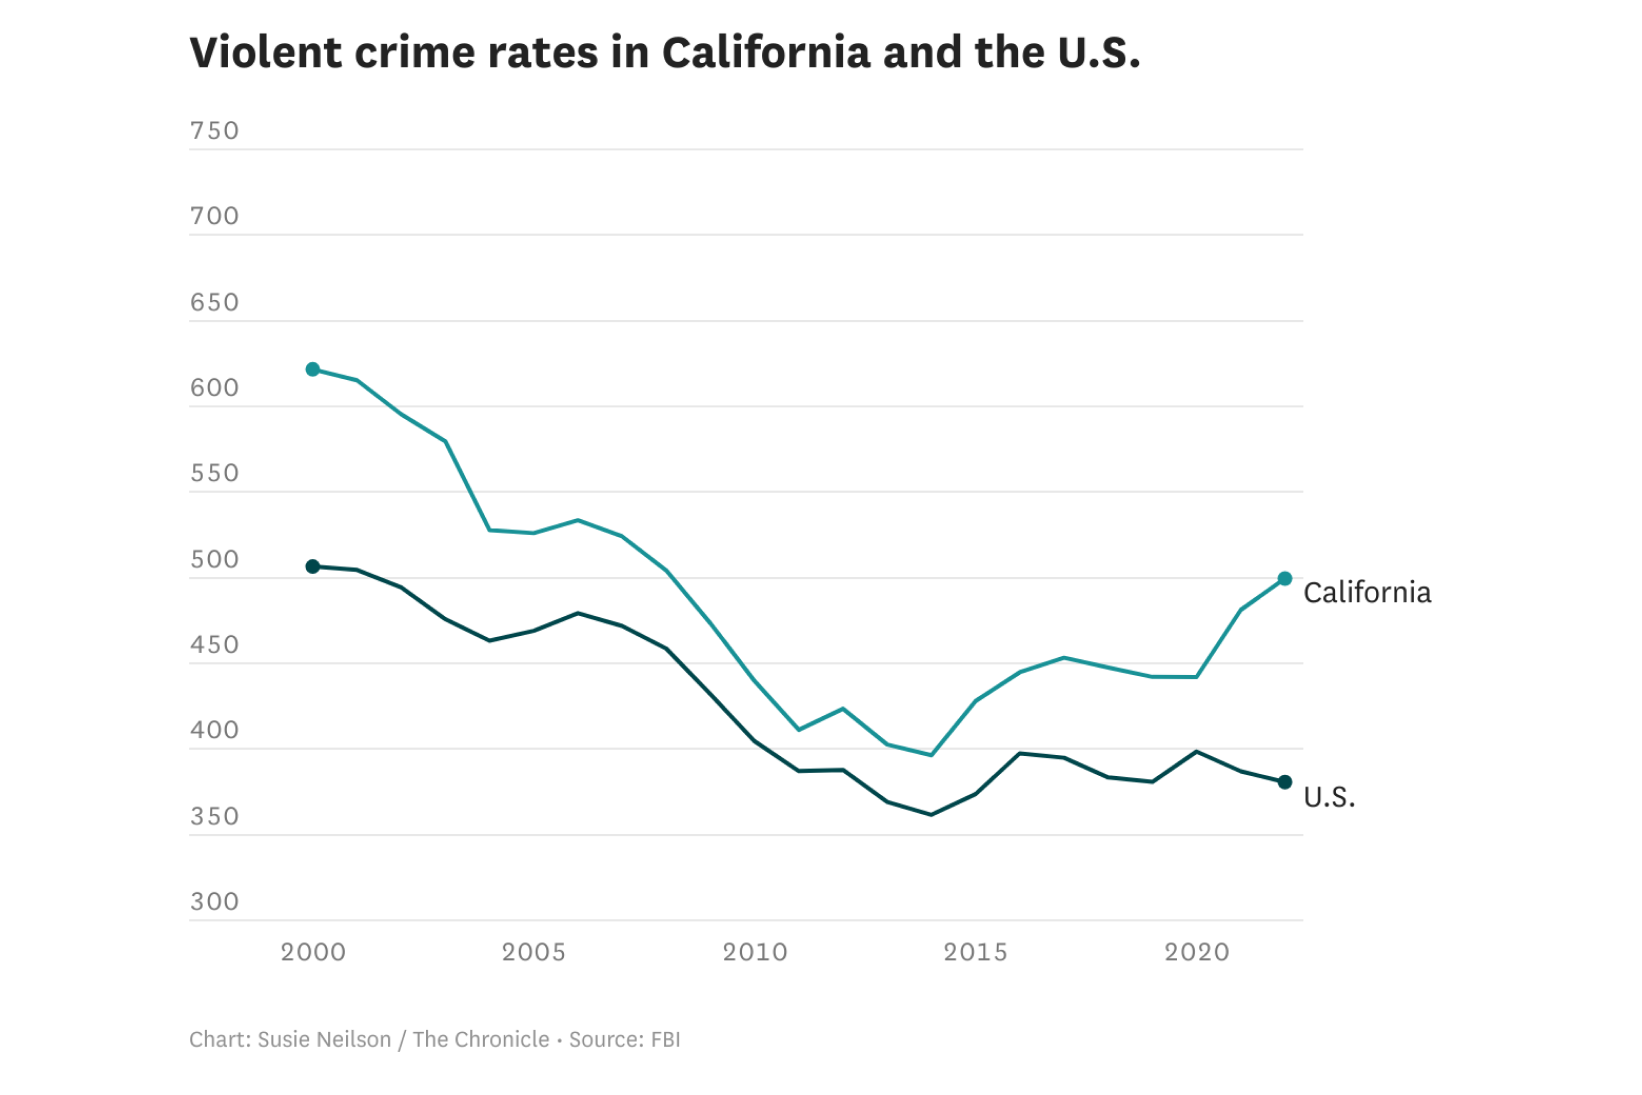 California crime rate trends: Here’s how they compare to the U.S.